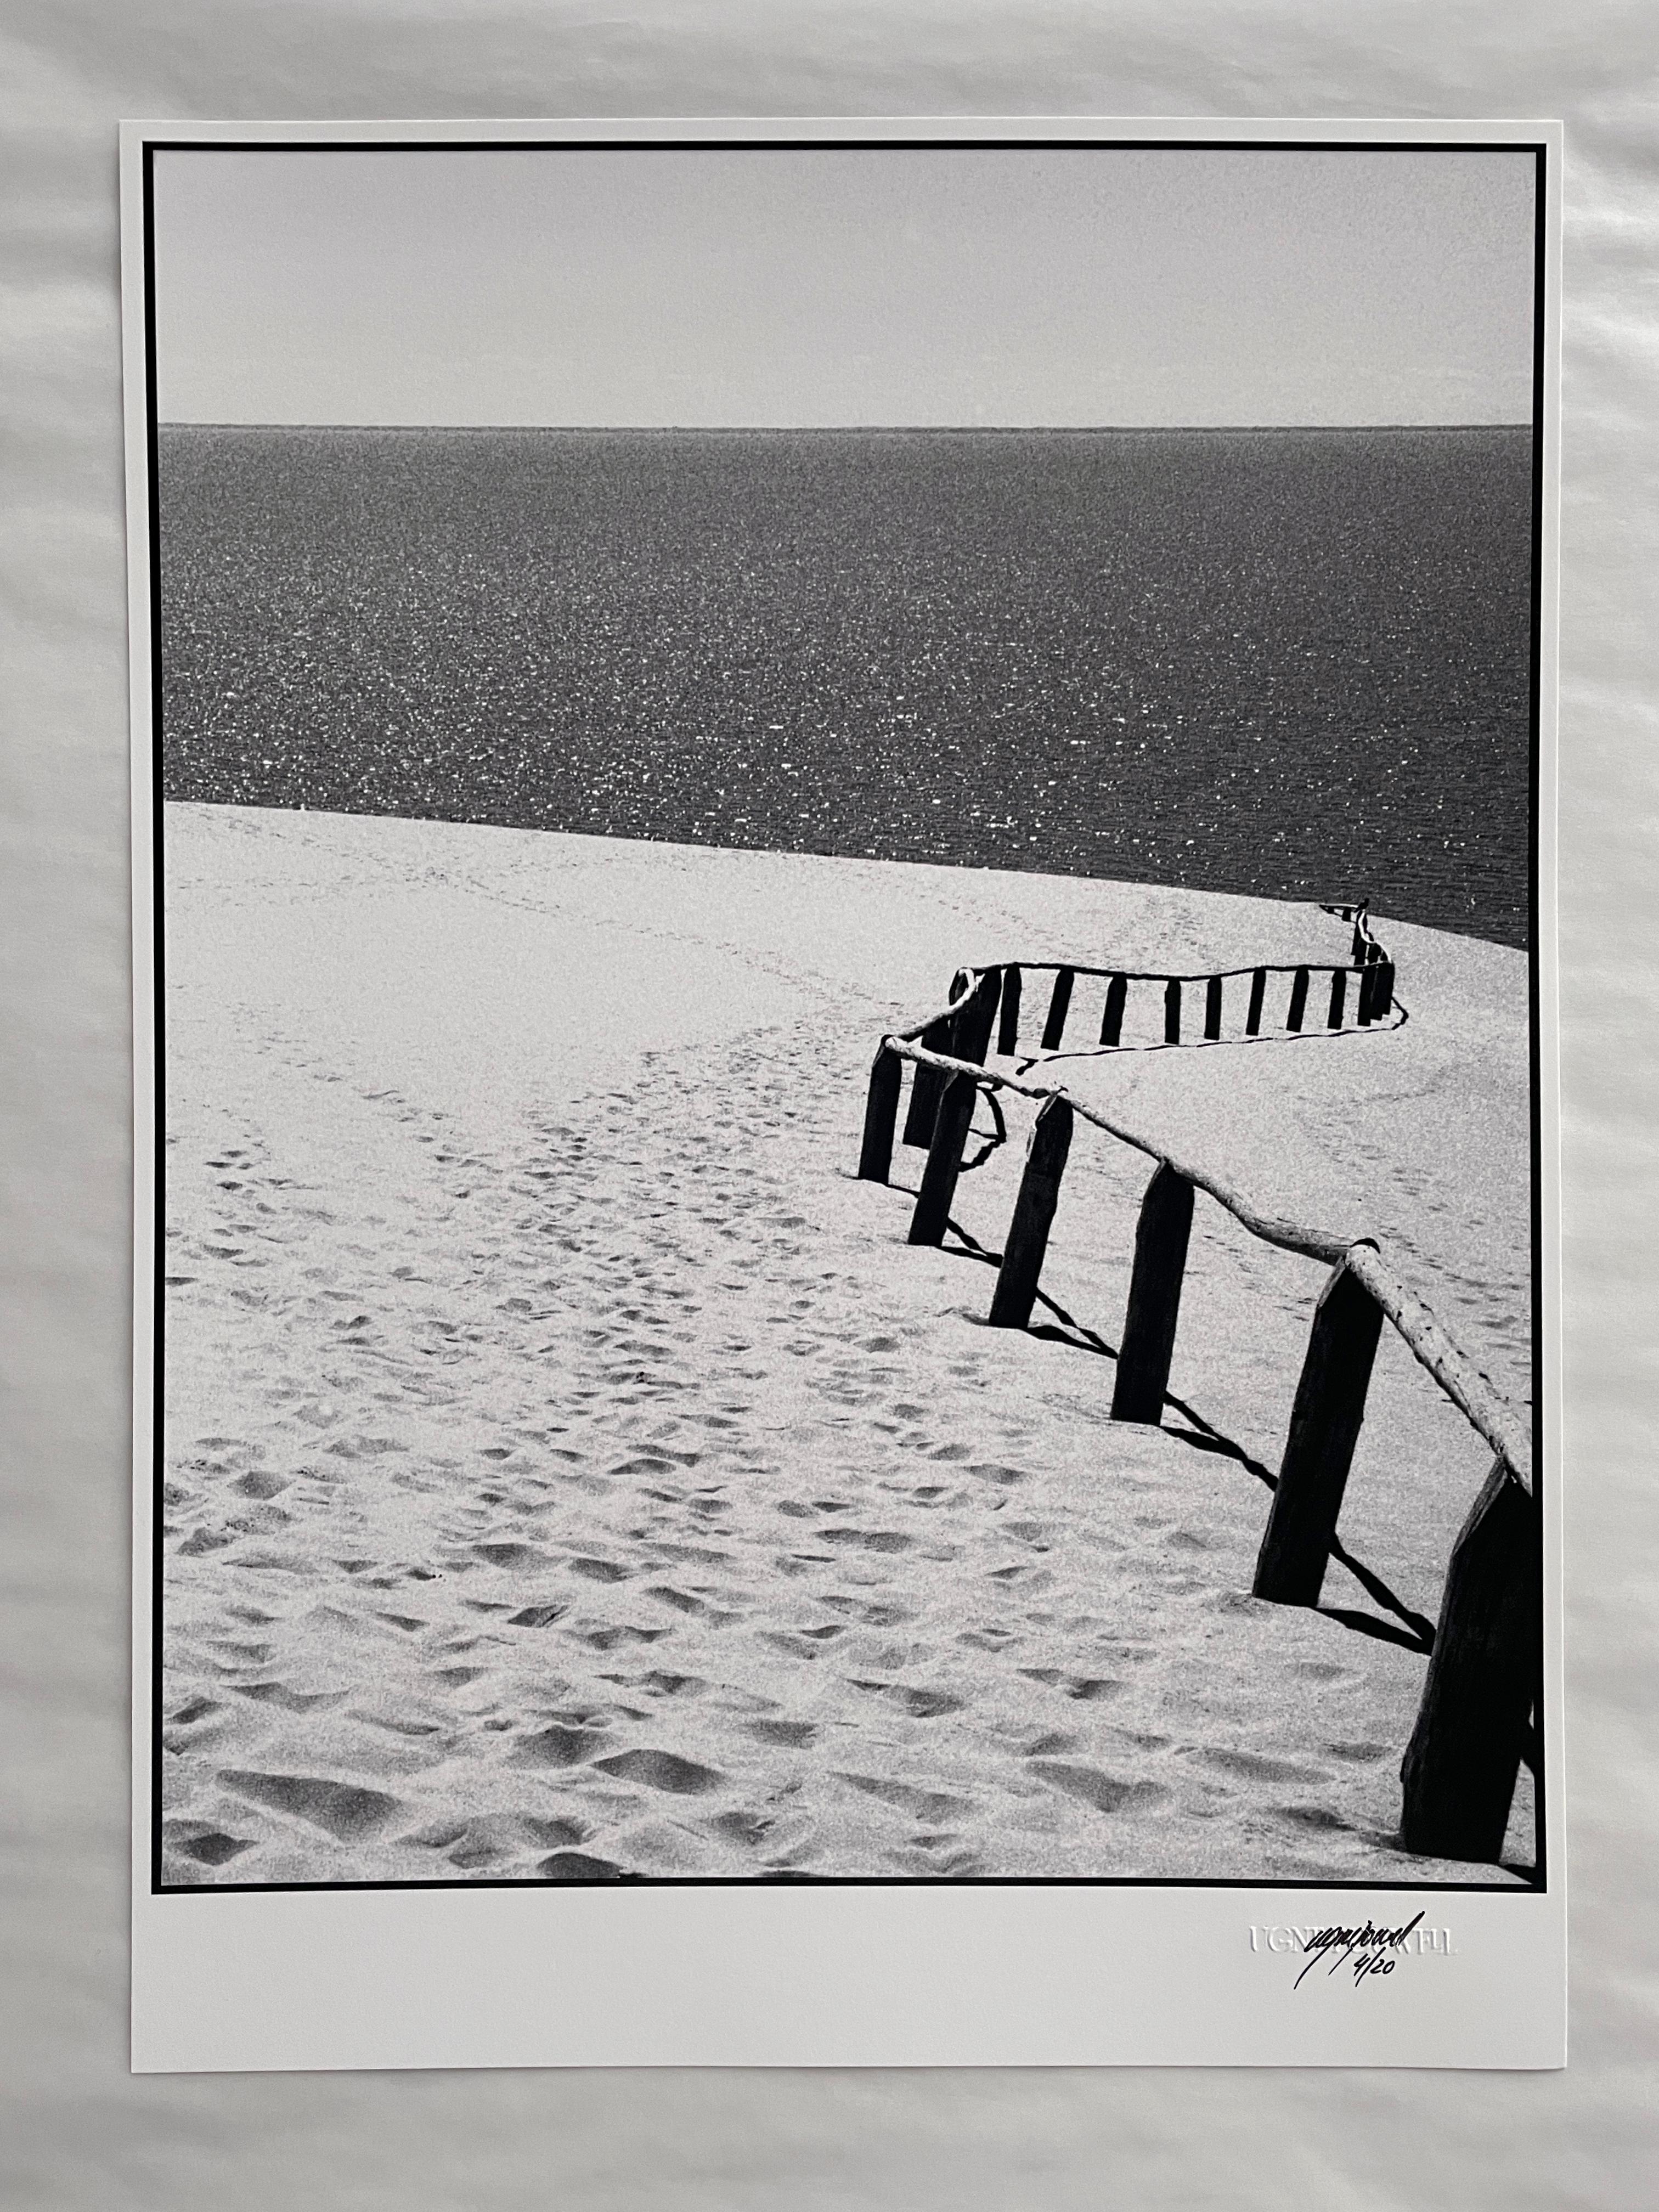 Nida - Black and White Analogue photograph of sand dunes and Baltic sea - Photograph by Ugne Pouwell